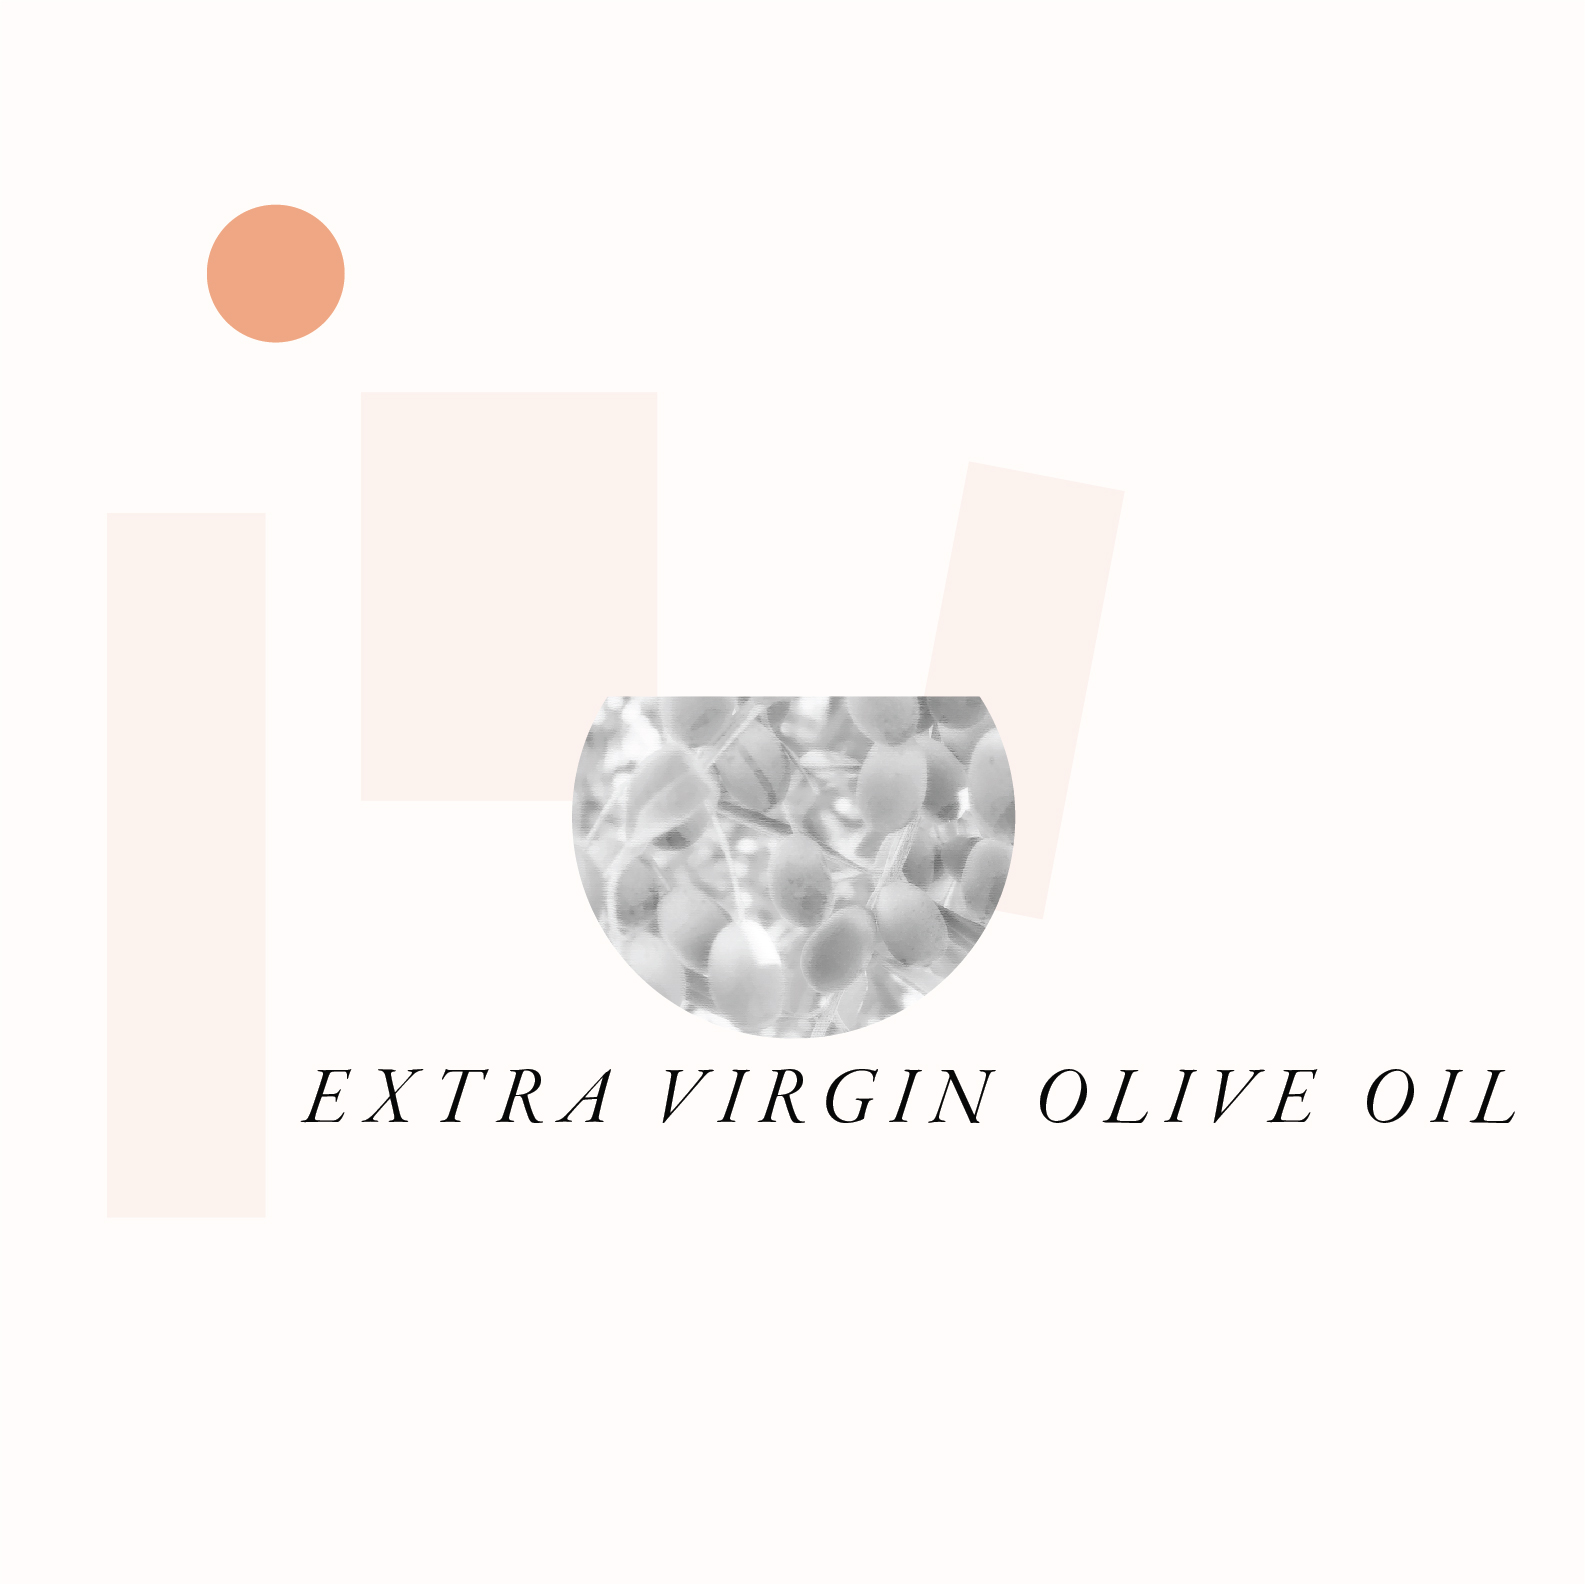 OIL GRAPHIC - EXTRA VIRGIN OLIVE OIL